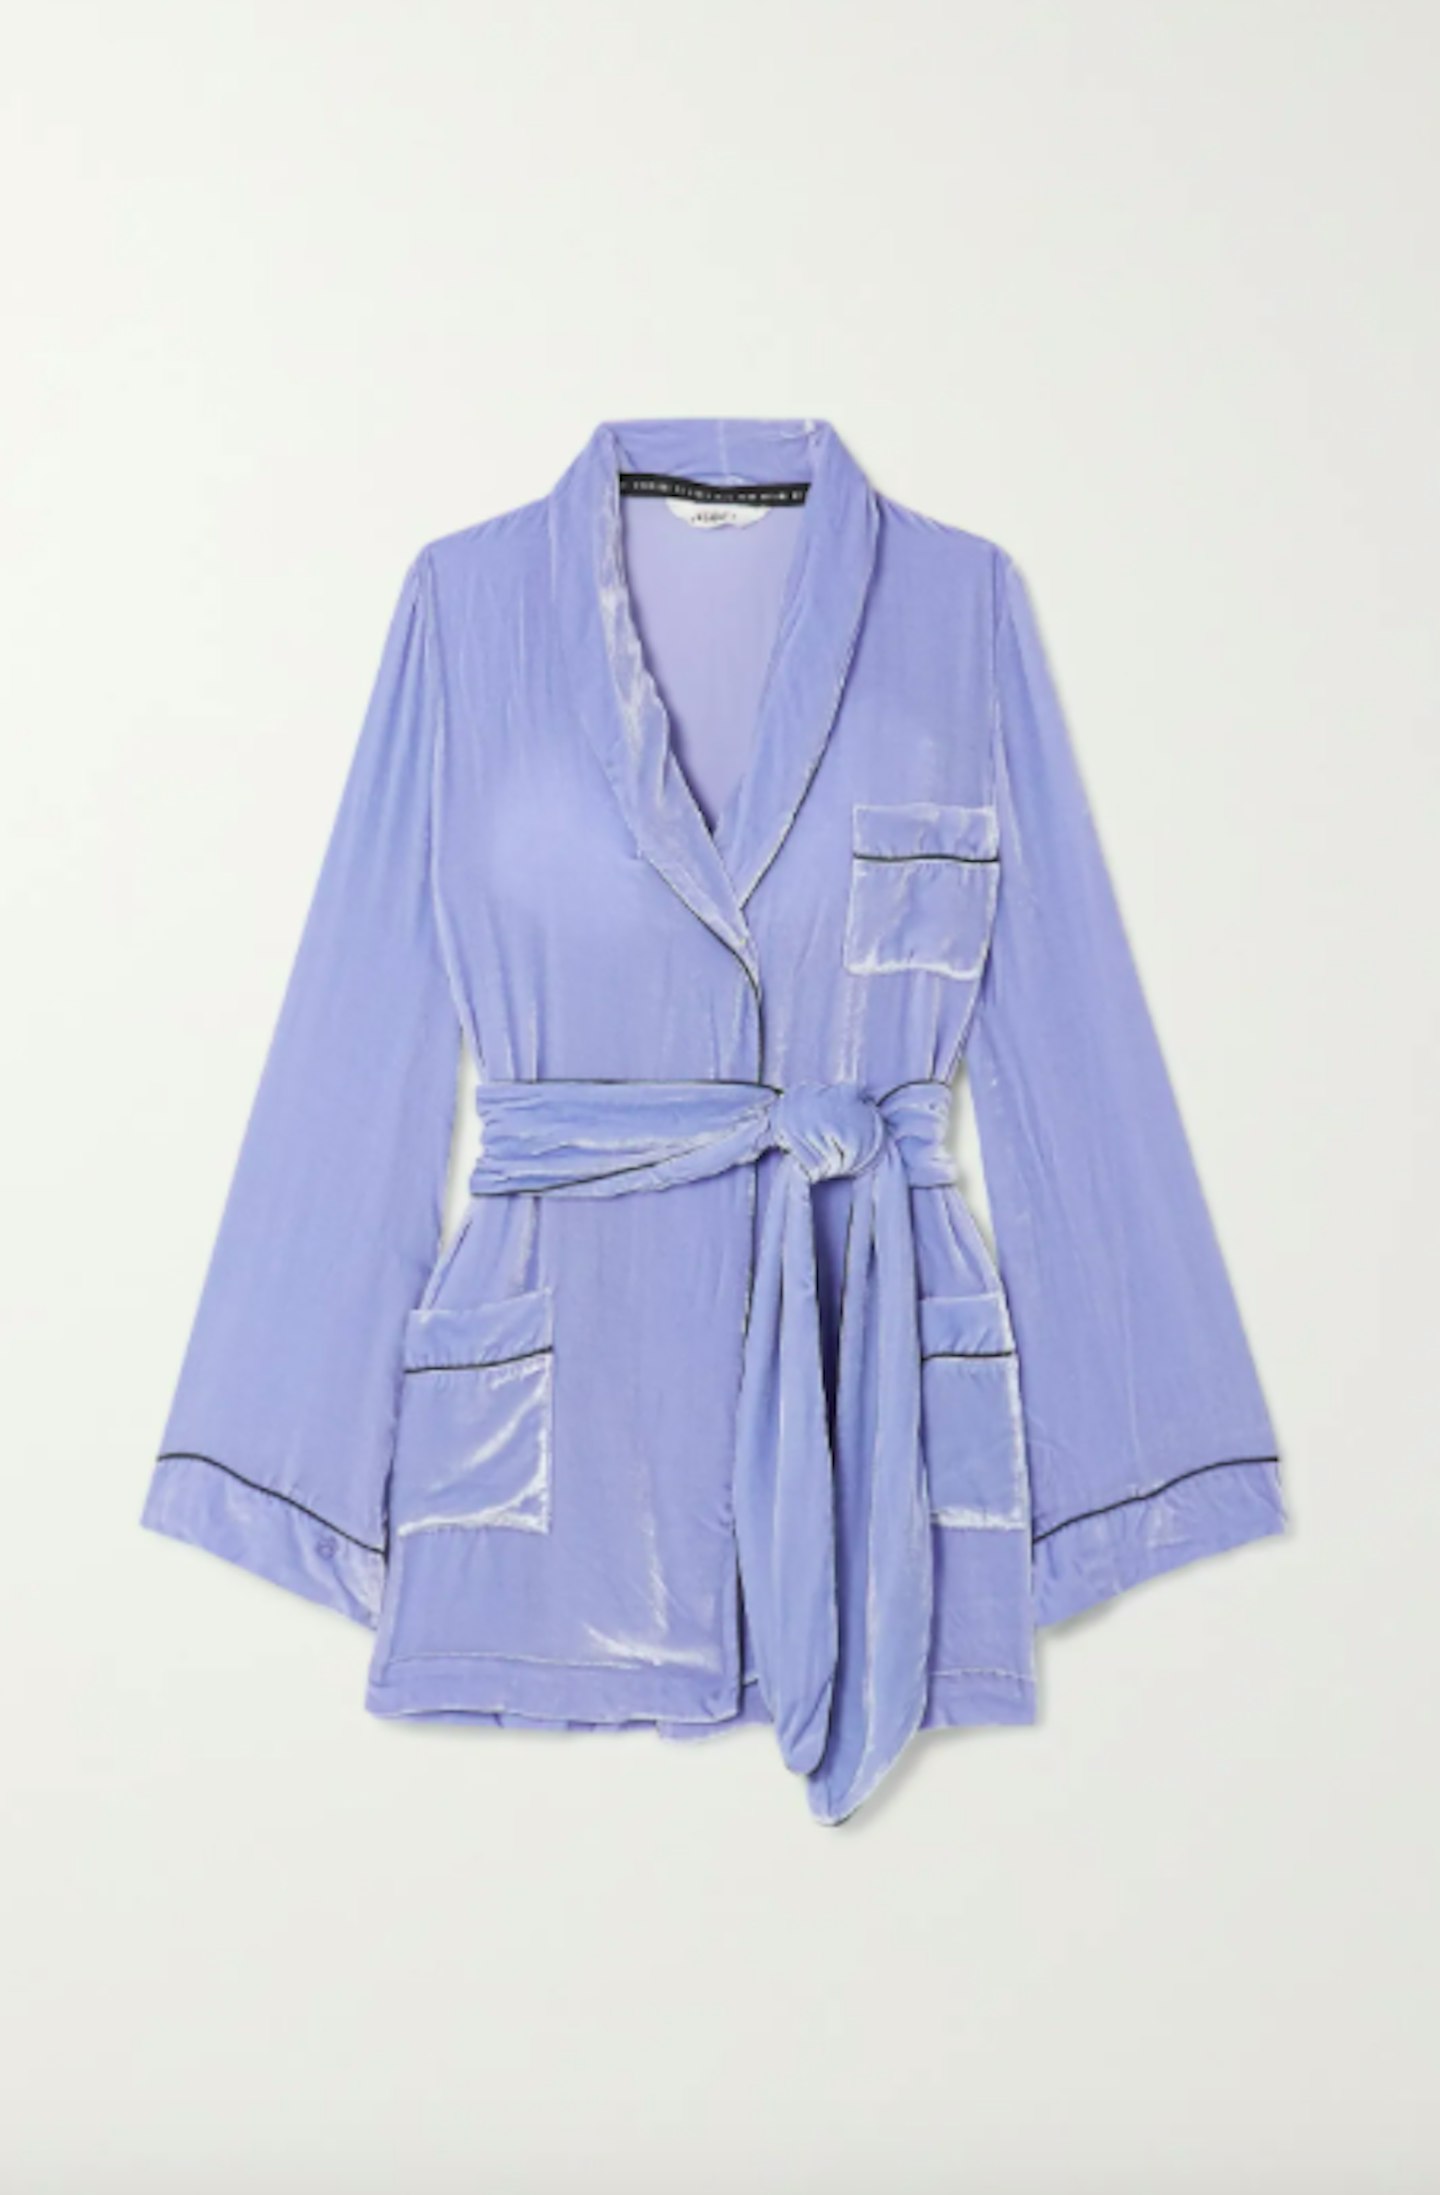 Sleeping With Jacques, Velvet Robe, £280 at Net-a-Porter